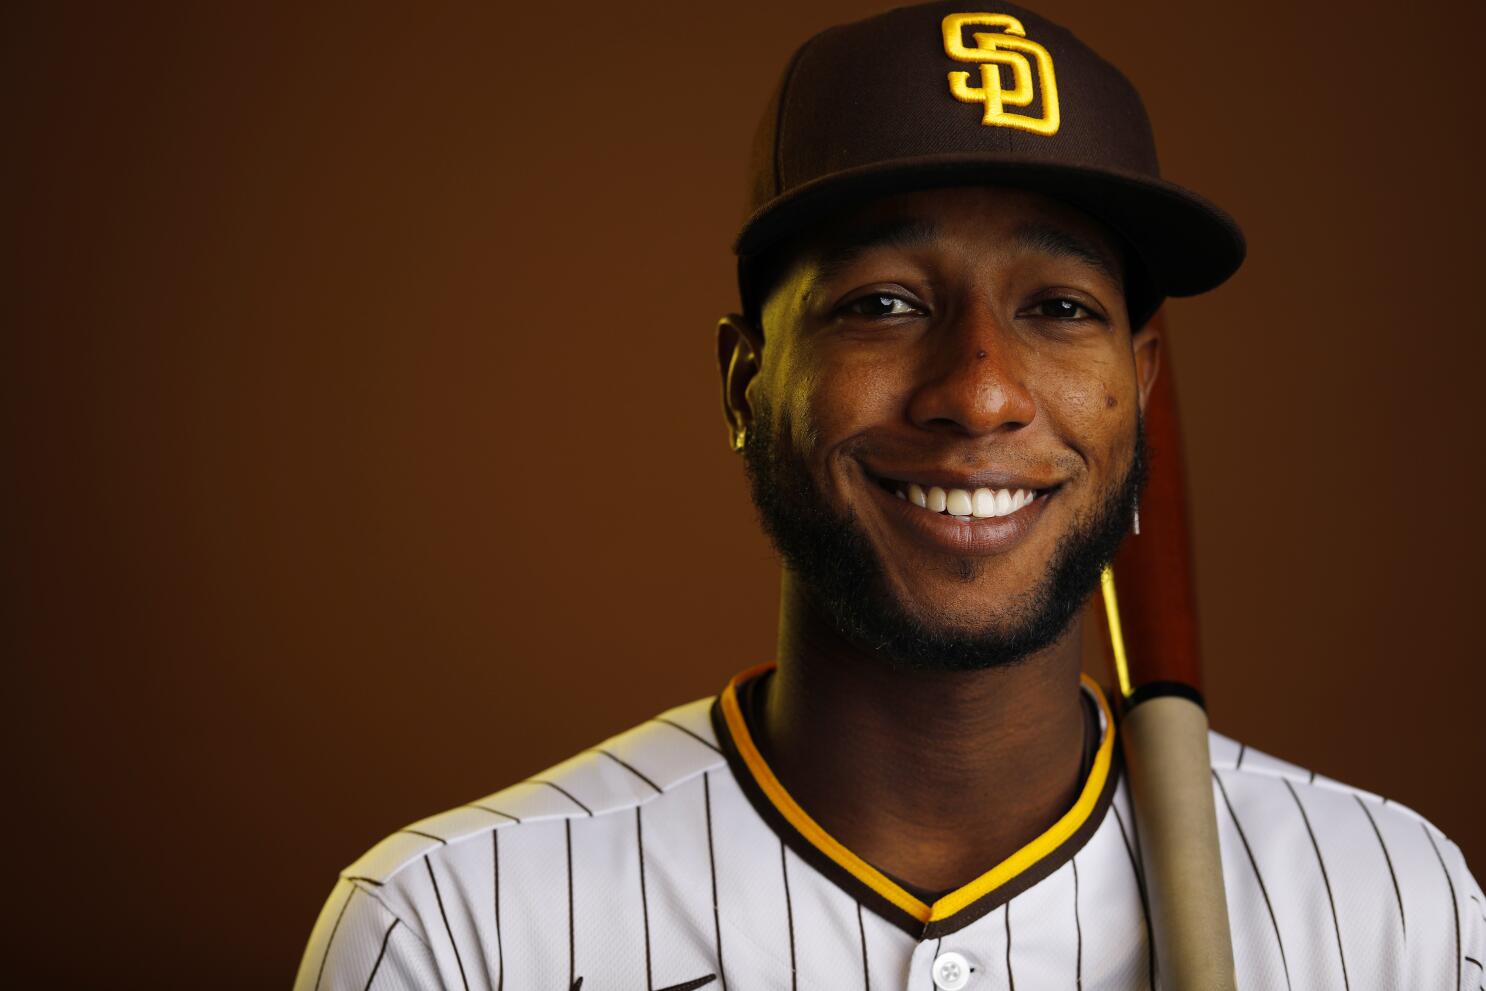 Report: Padres shopping Paddack, Weathers for outfield help